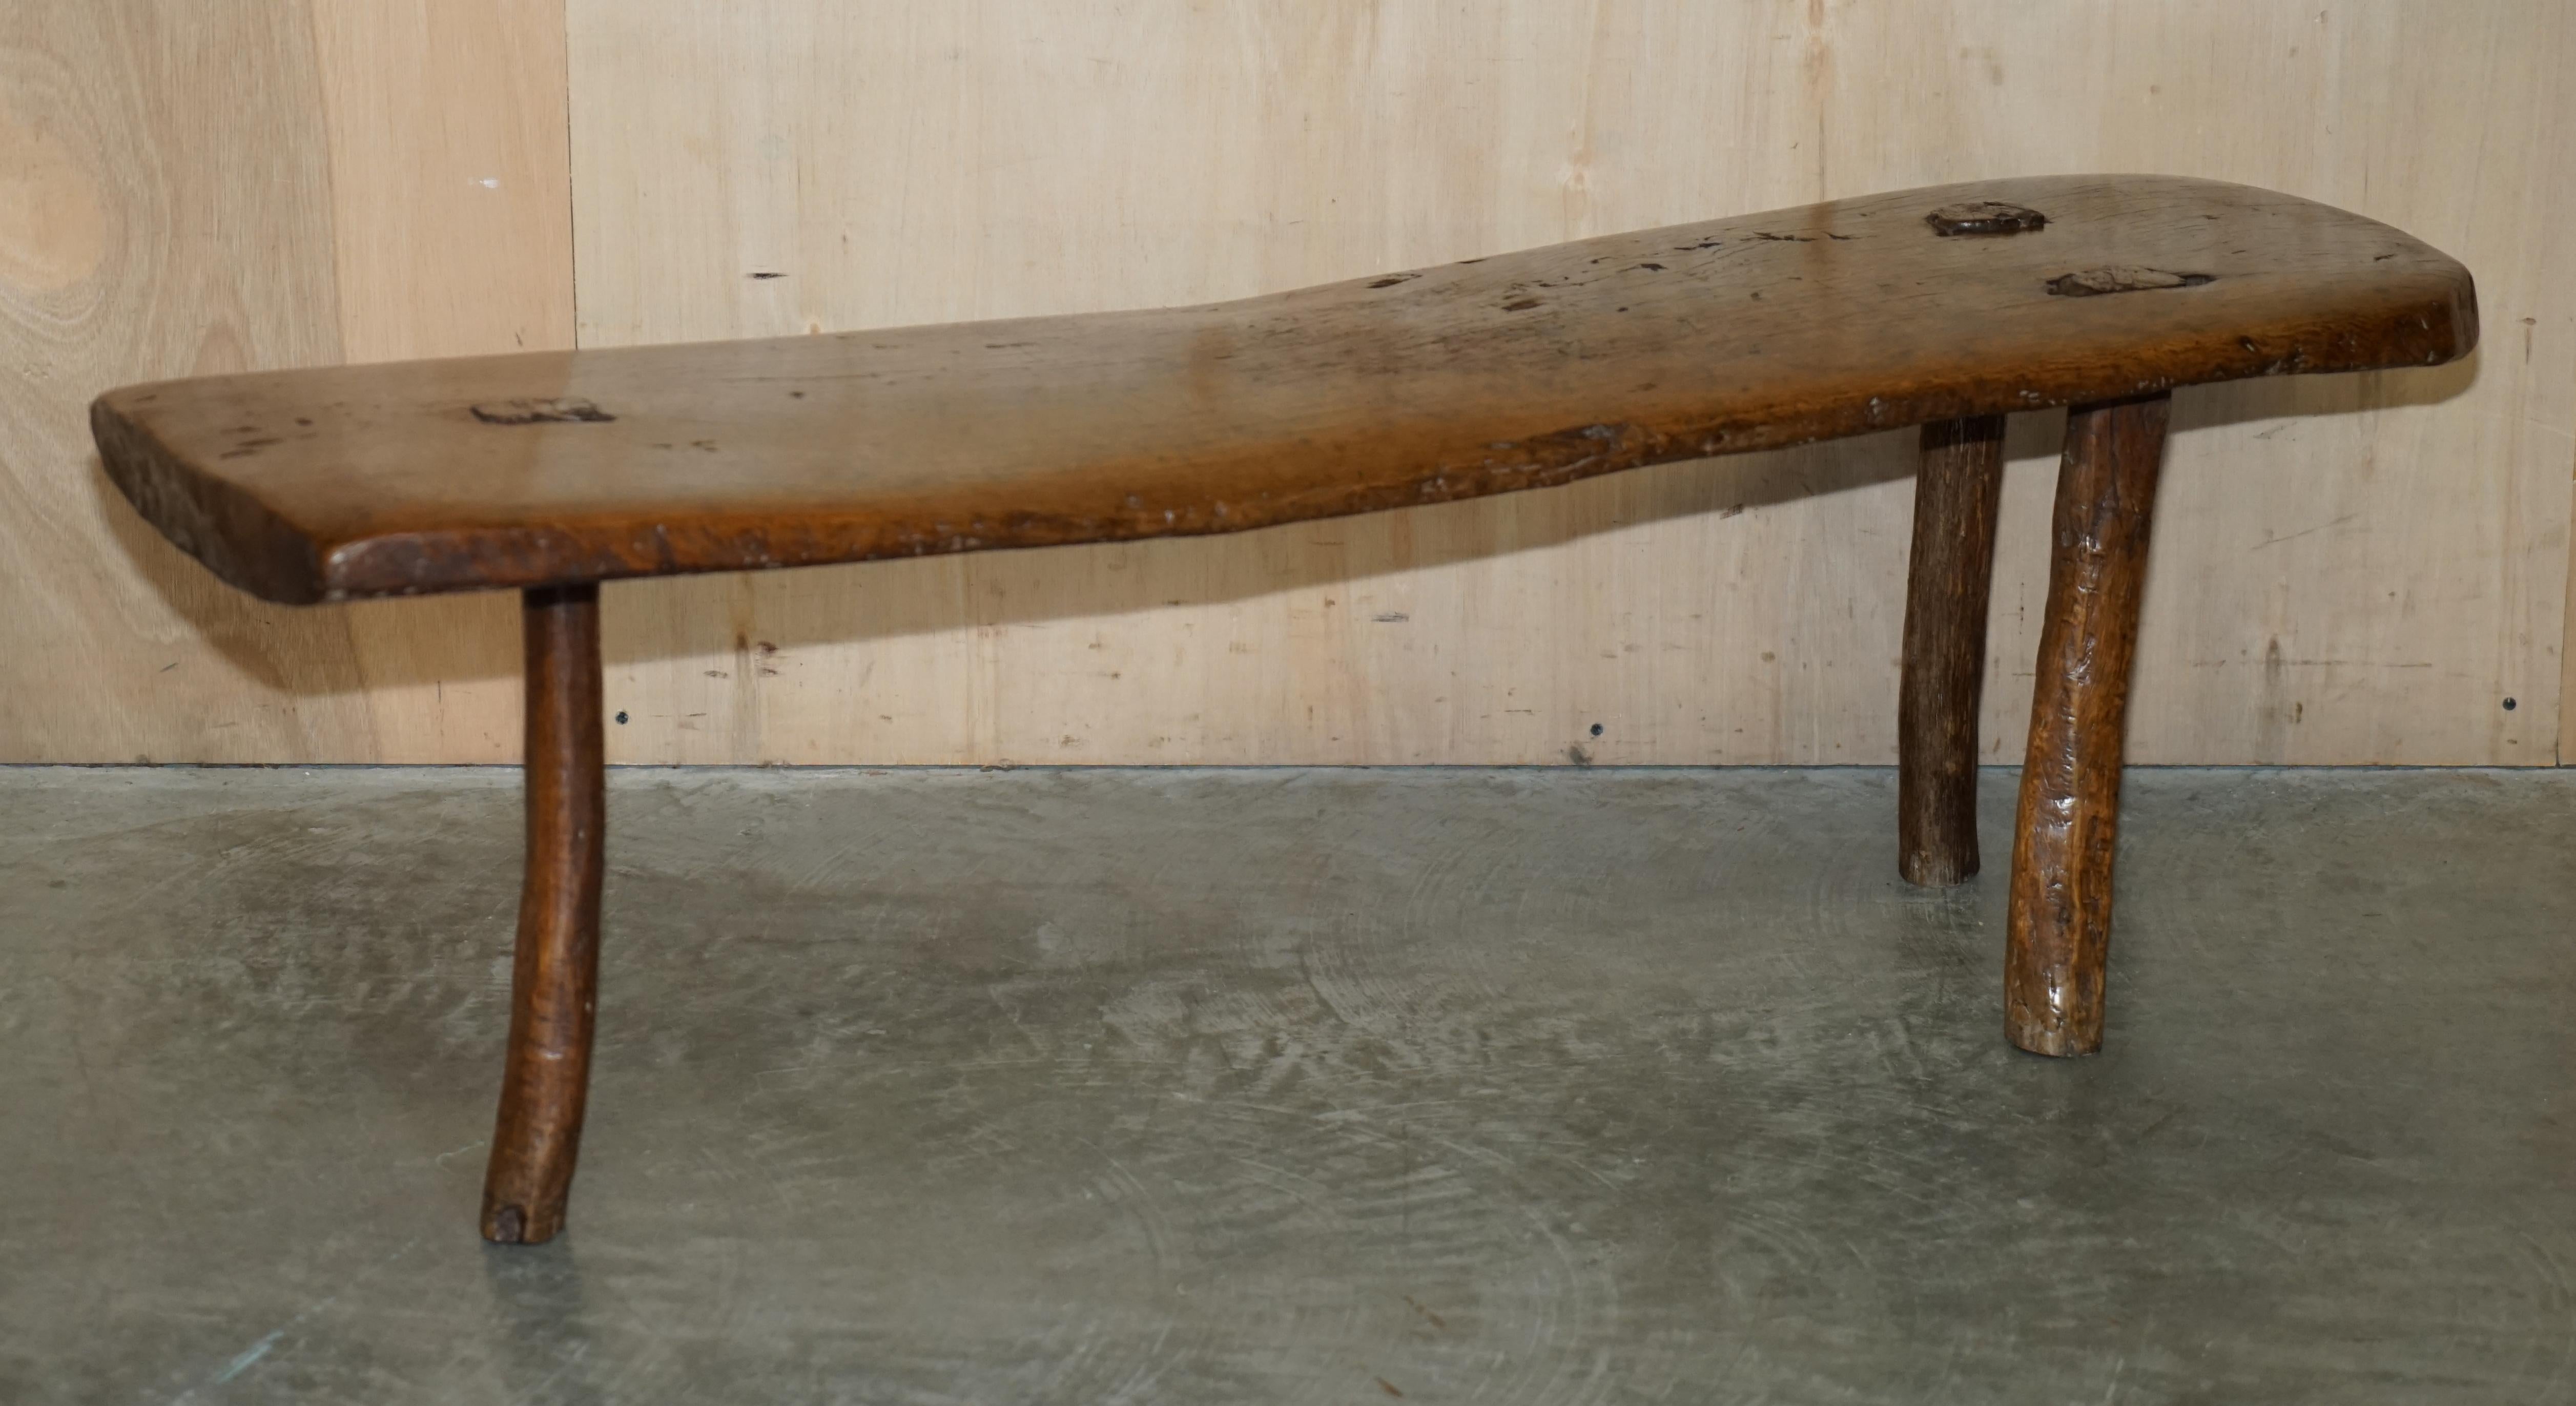 We are is delighted to offer for sale this stunning, super rare 18th century Spanish primitive three legged bench which can be used as a coffee table.

This has to be one of the oldest and most charming pieces I have ever seen, it dates to circa